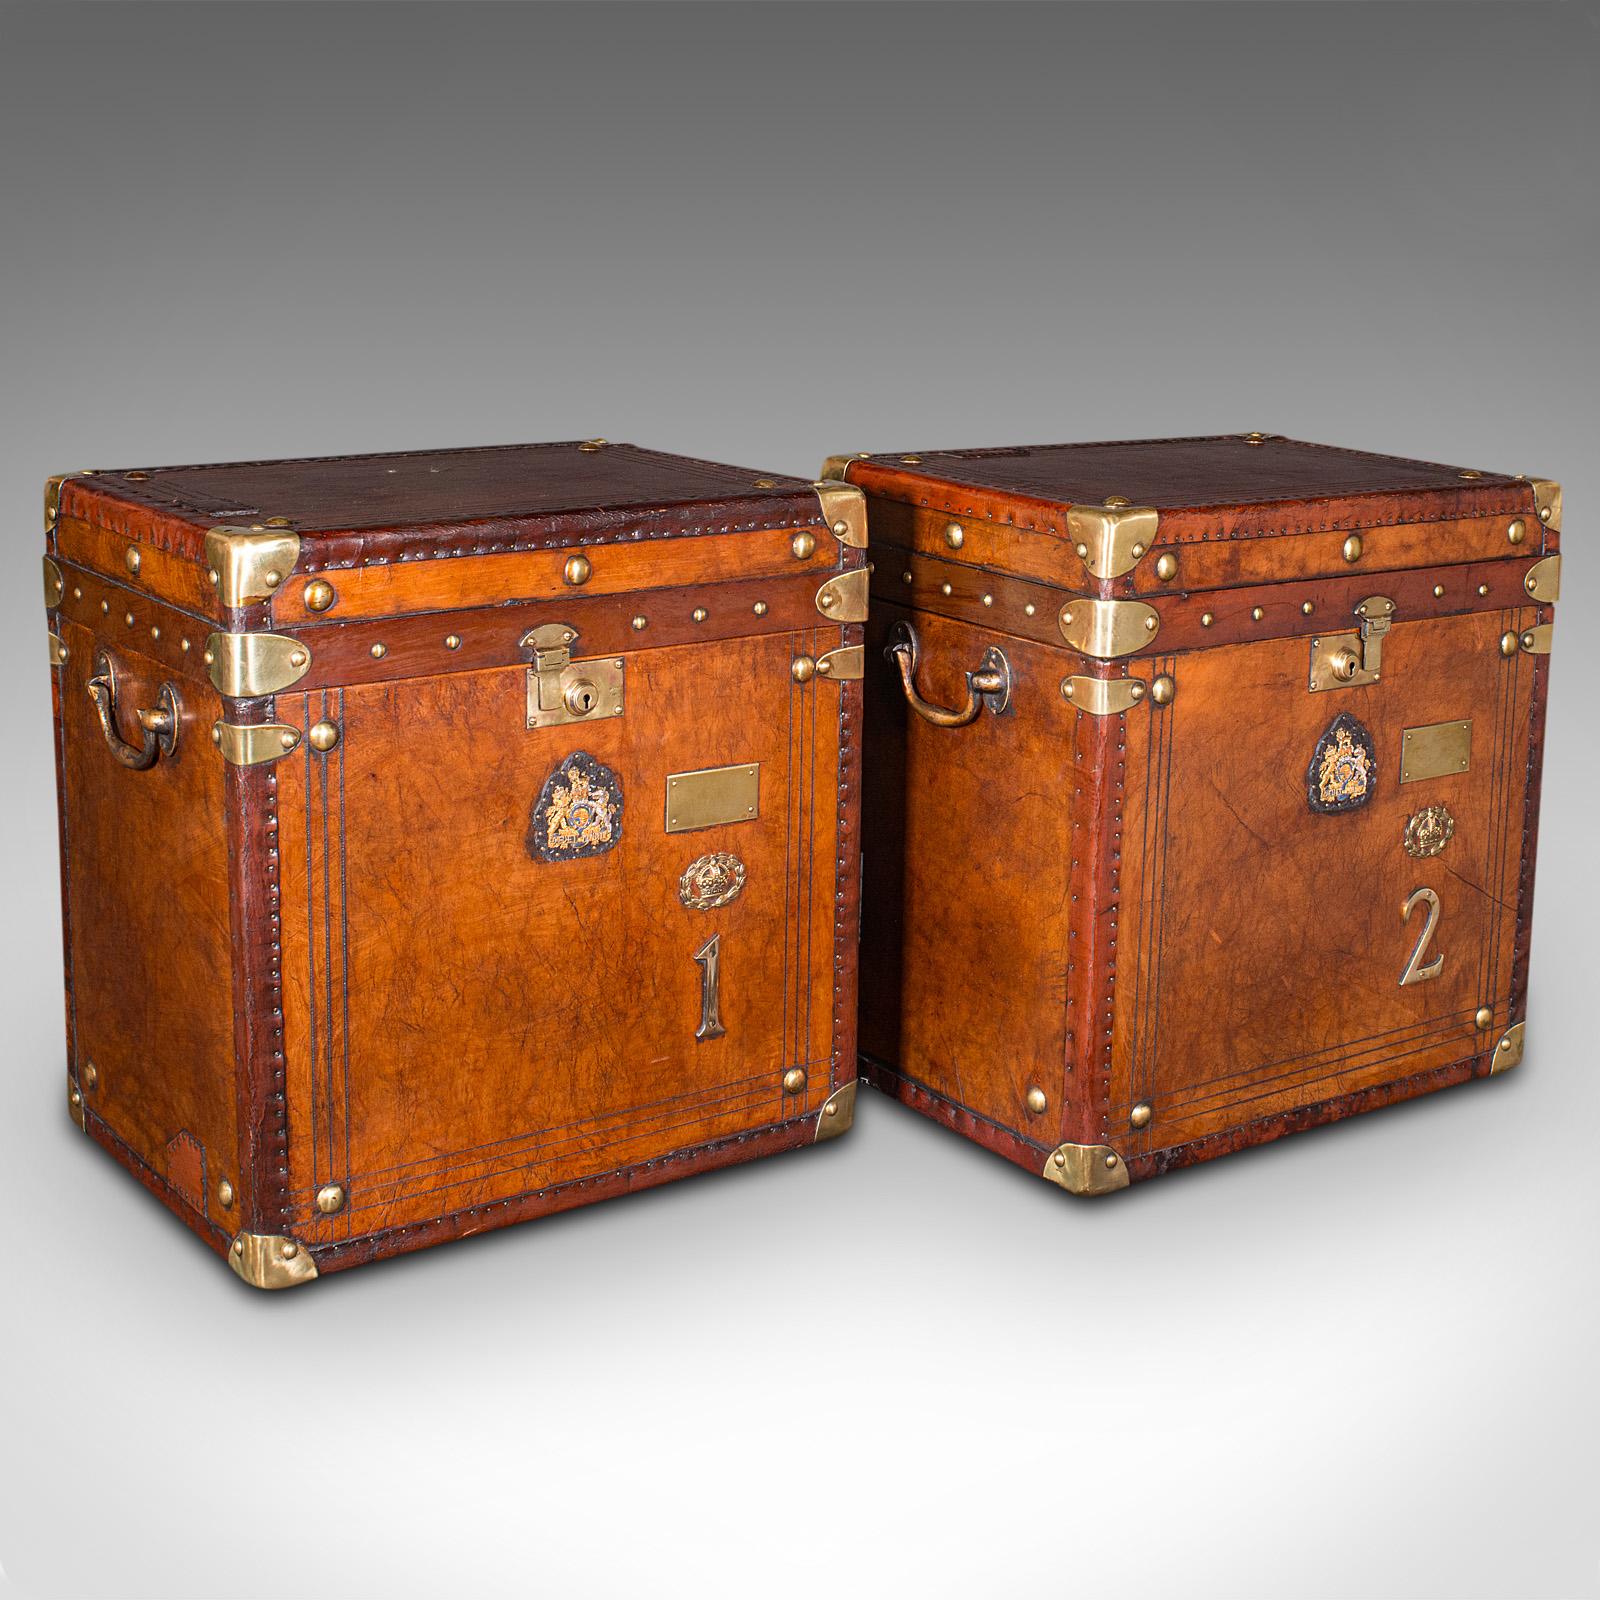 This is a pair of antique officer's campaign luggage cases. An English, leather and brass bedside nightstand, dating to the late Edwardian period, circa 1910.

Exquisite casework, with beautifully appointed detail and finishes
Displaying a desirable